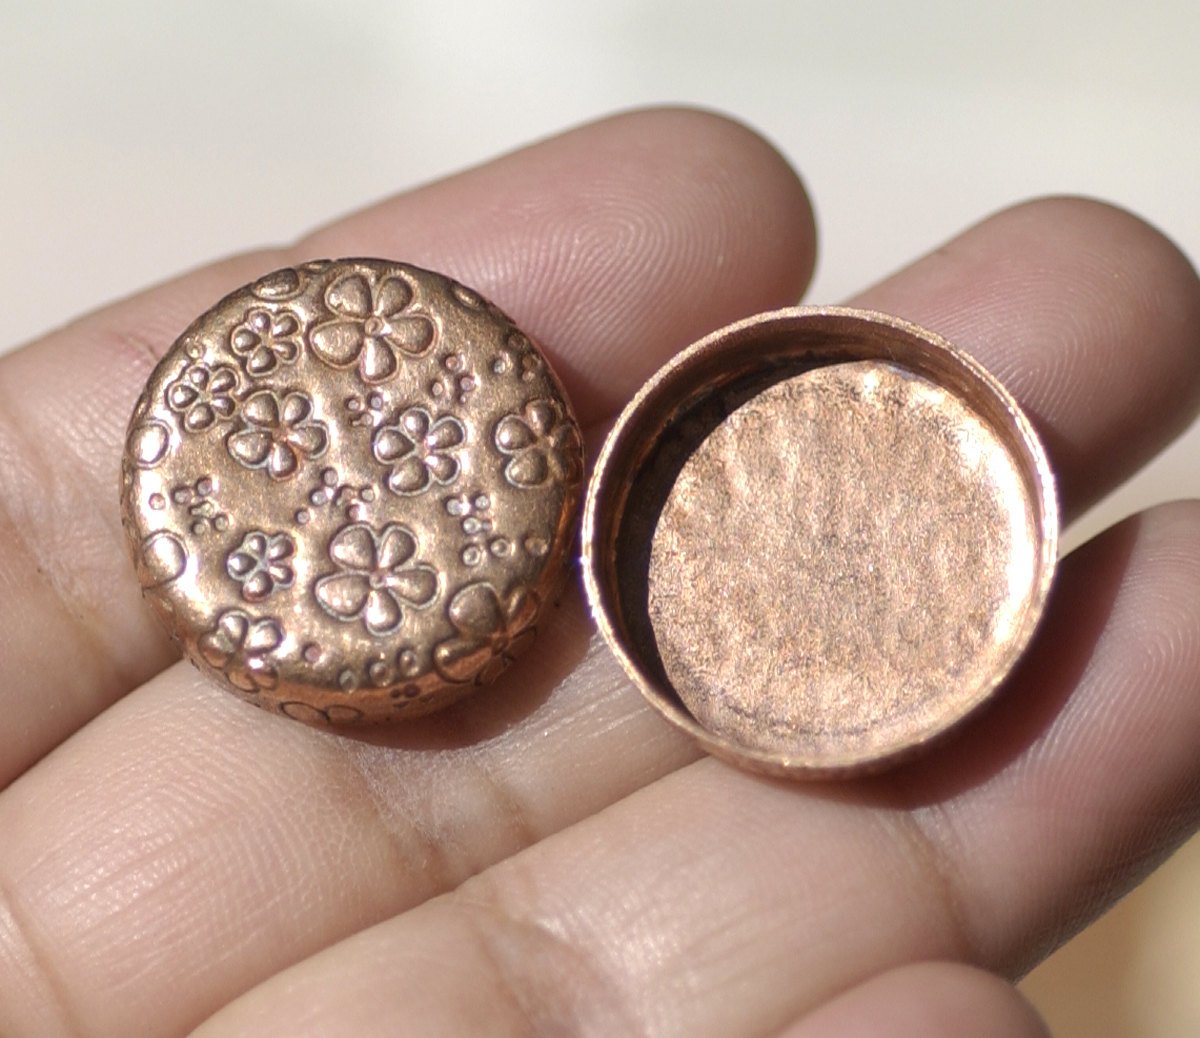 Textured Copper Bezel Cups 26g 21mm Round Blanks Cutout for Enameling Metalworking Charms Jewelry Making